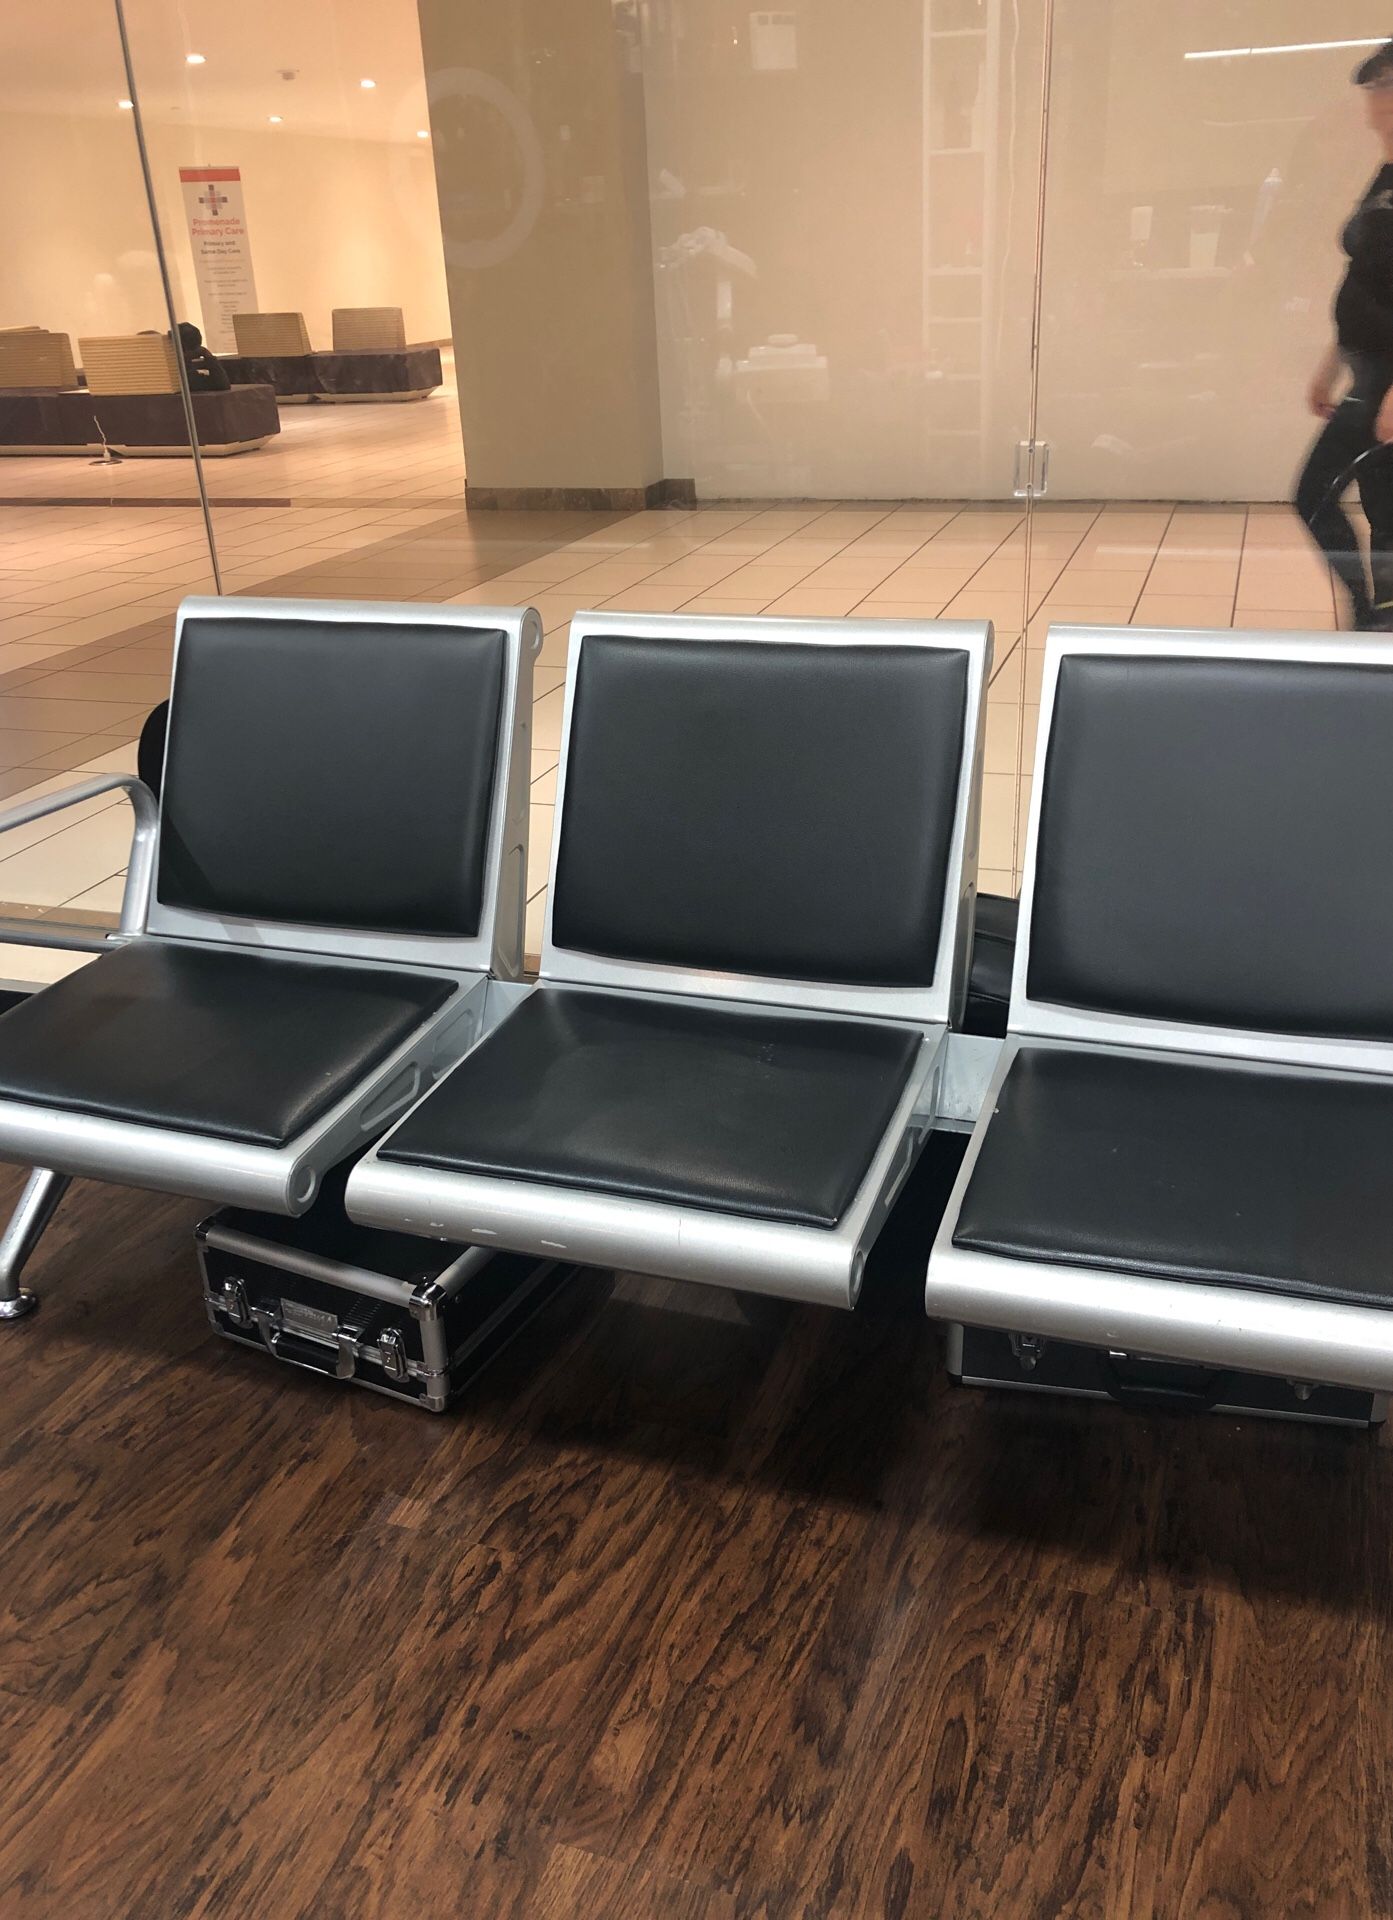 Air port style waiting chairs